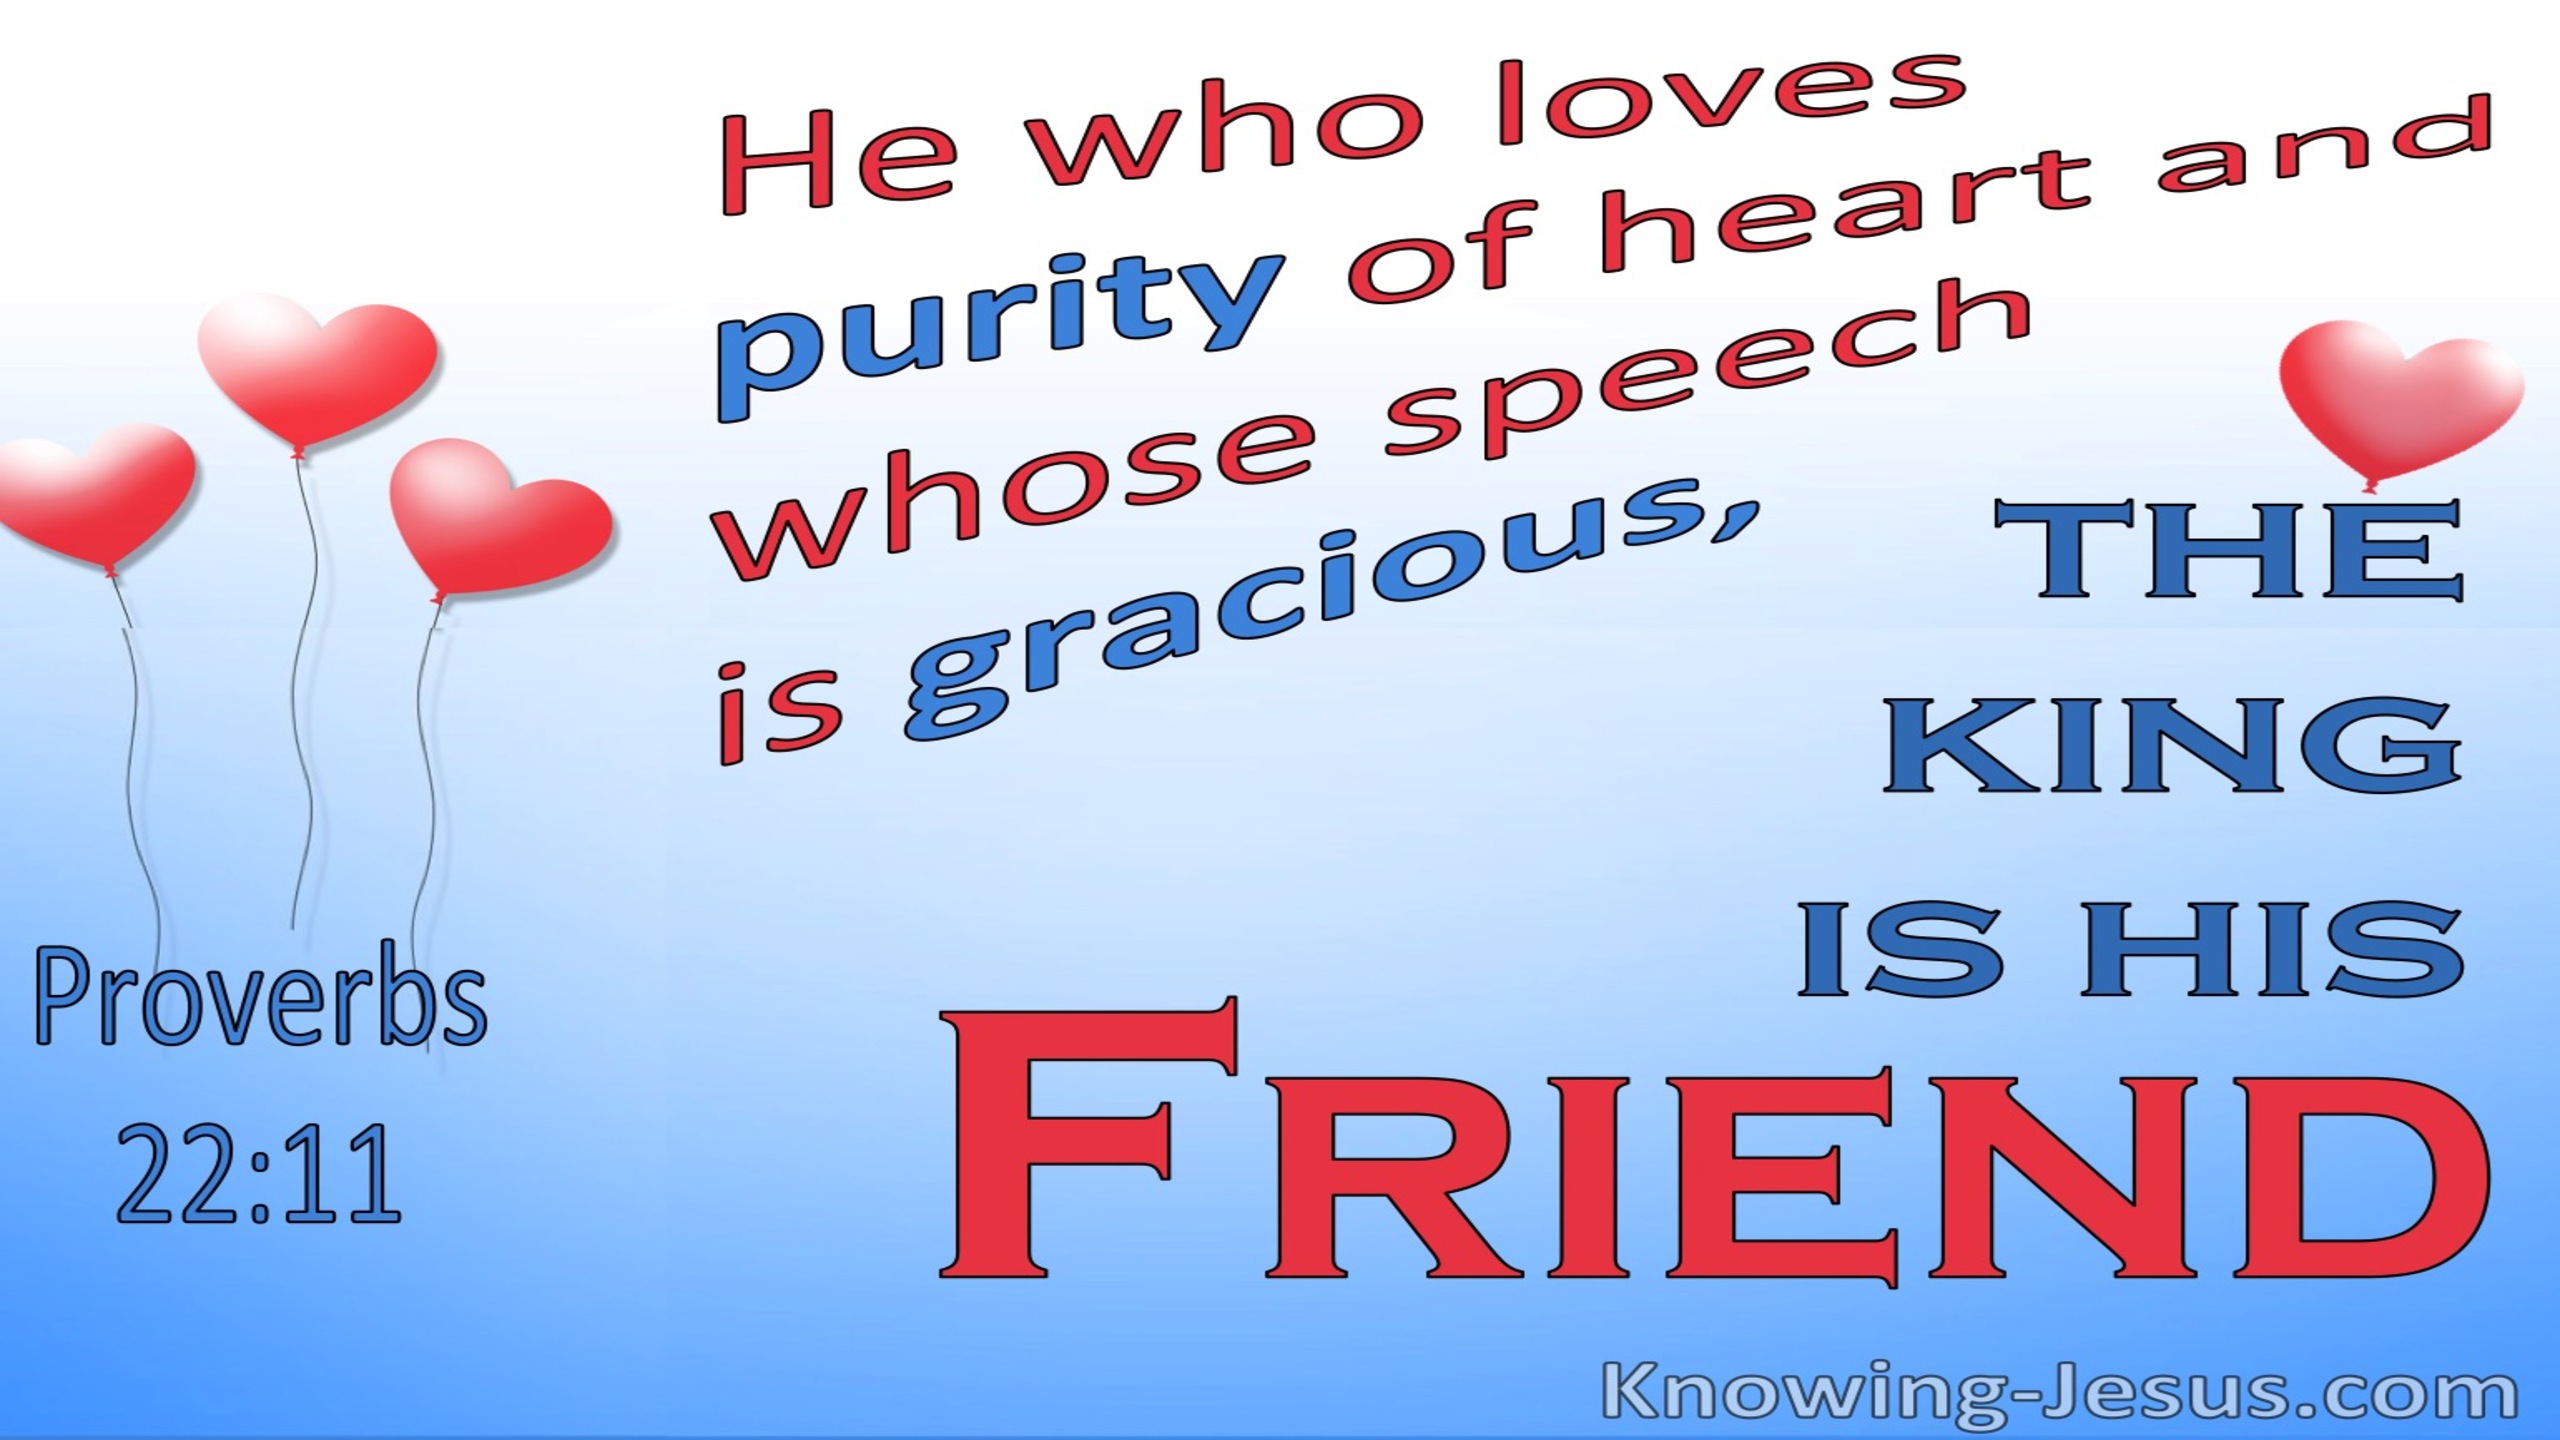 Proverbs 22:11 Purity Of Heart And Gracious Speech The King Is His Friend (red)